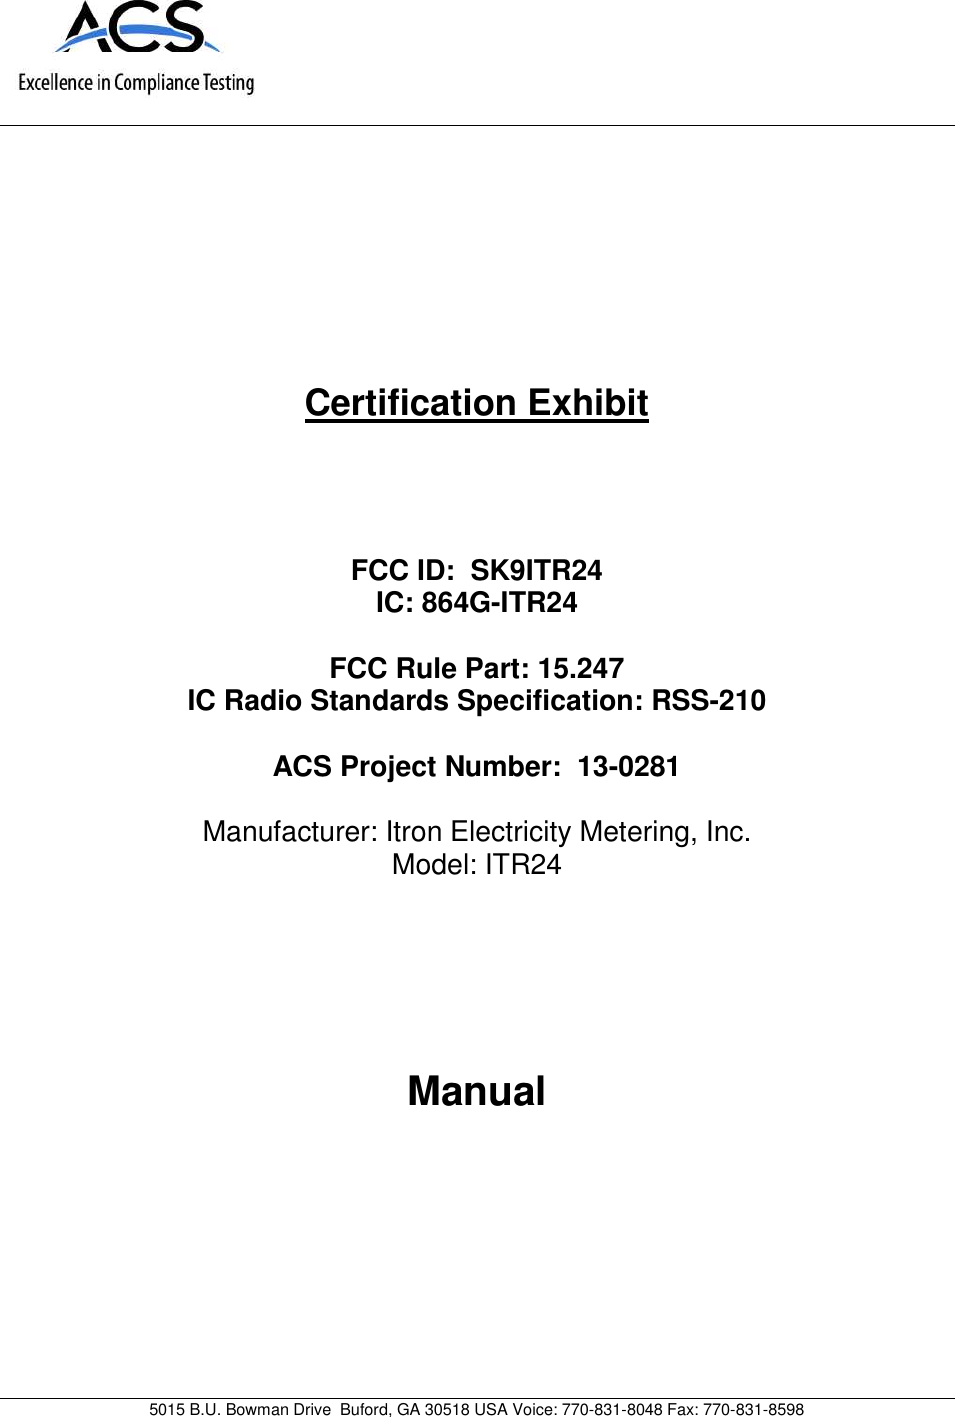 5015 B.U. Bowman Drive Buford, GA 30518 USA Voice: 770-831-8048 Fax: 770-831-8598Certification ExhibitFCC ID: SK9ITR24IC: 864G-ITR24FCC Rule Part: 15.247IC Radio Standards Specification: RSS-210ACS Project Number: 13-0281Manufacturer: Itron Electricity Metering, Inc.Model: ITR24Manual